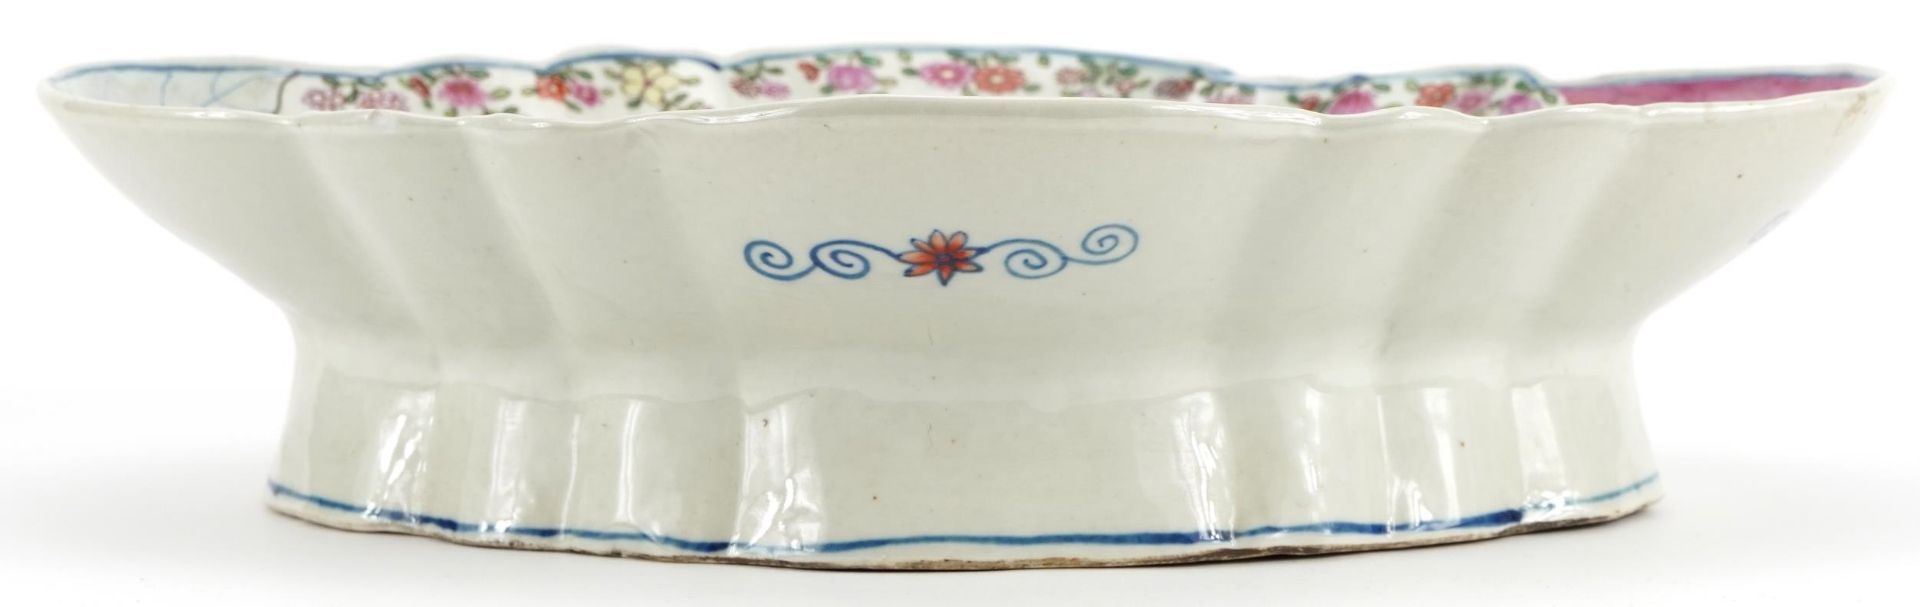 Chinese Wucai porcelain footed dish hand painted with flowers, 8.5cm high x 36cm wide